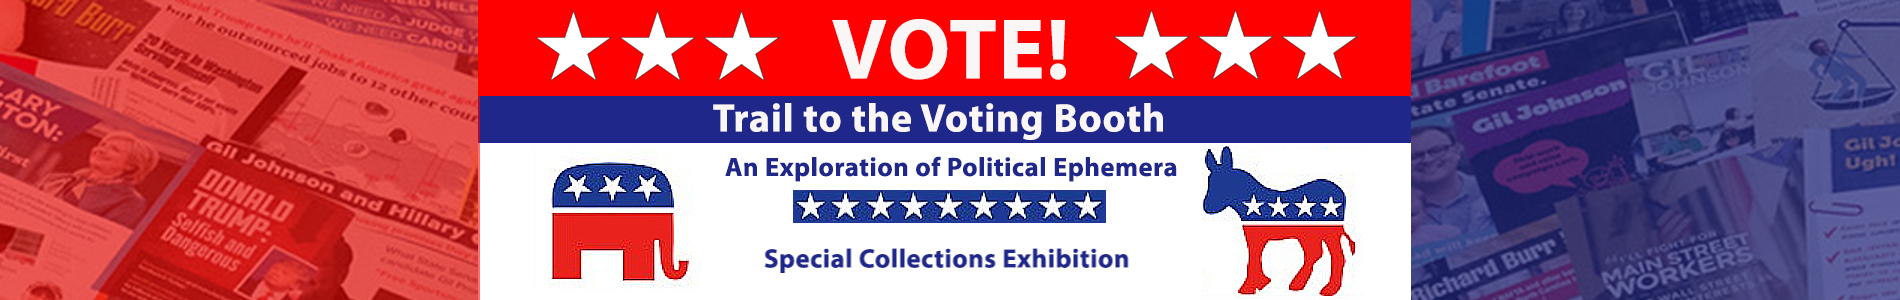 Banner Image for Trail to the Voting Booth